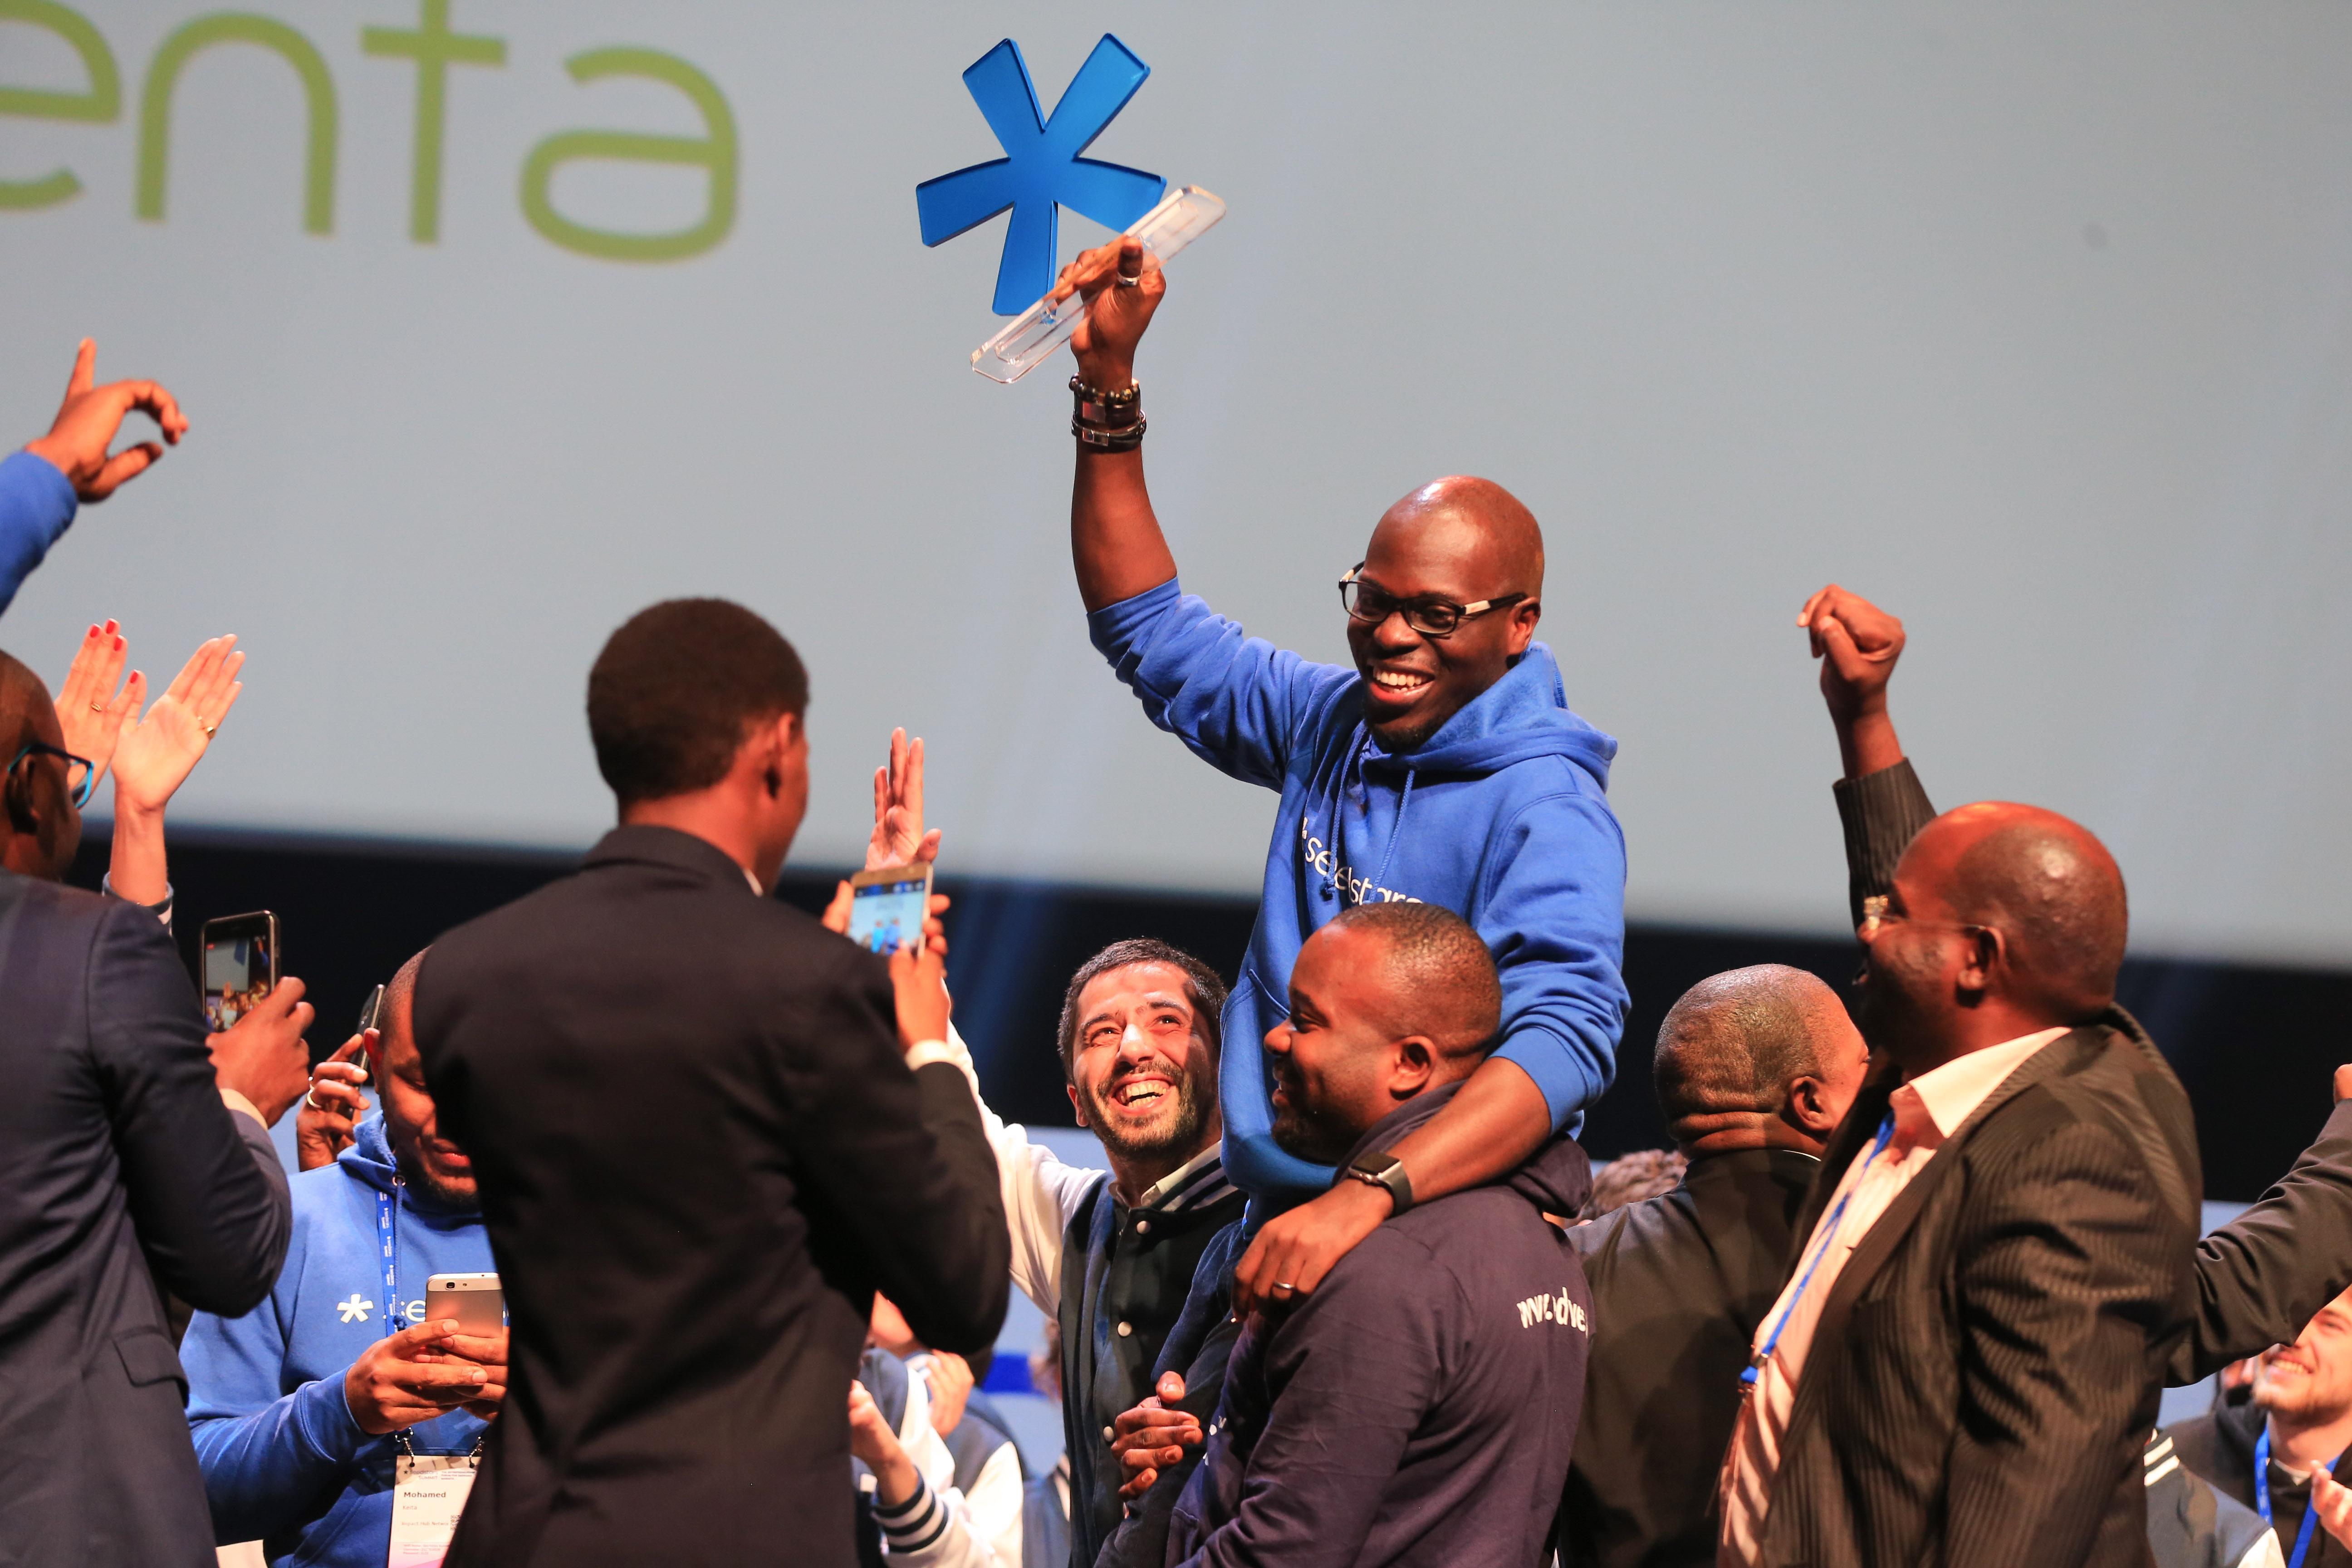 AgroCenta from Ghana was declared the overall winners of the 2018 Seedstar summit in Lausanne, Switzerland on 12th Thursday, April 2018. (Photo Credit: Seedstars Global)